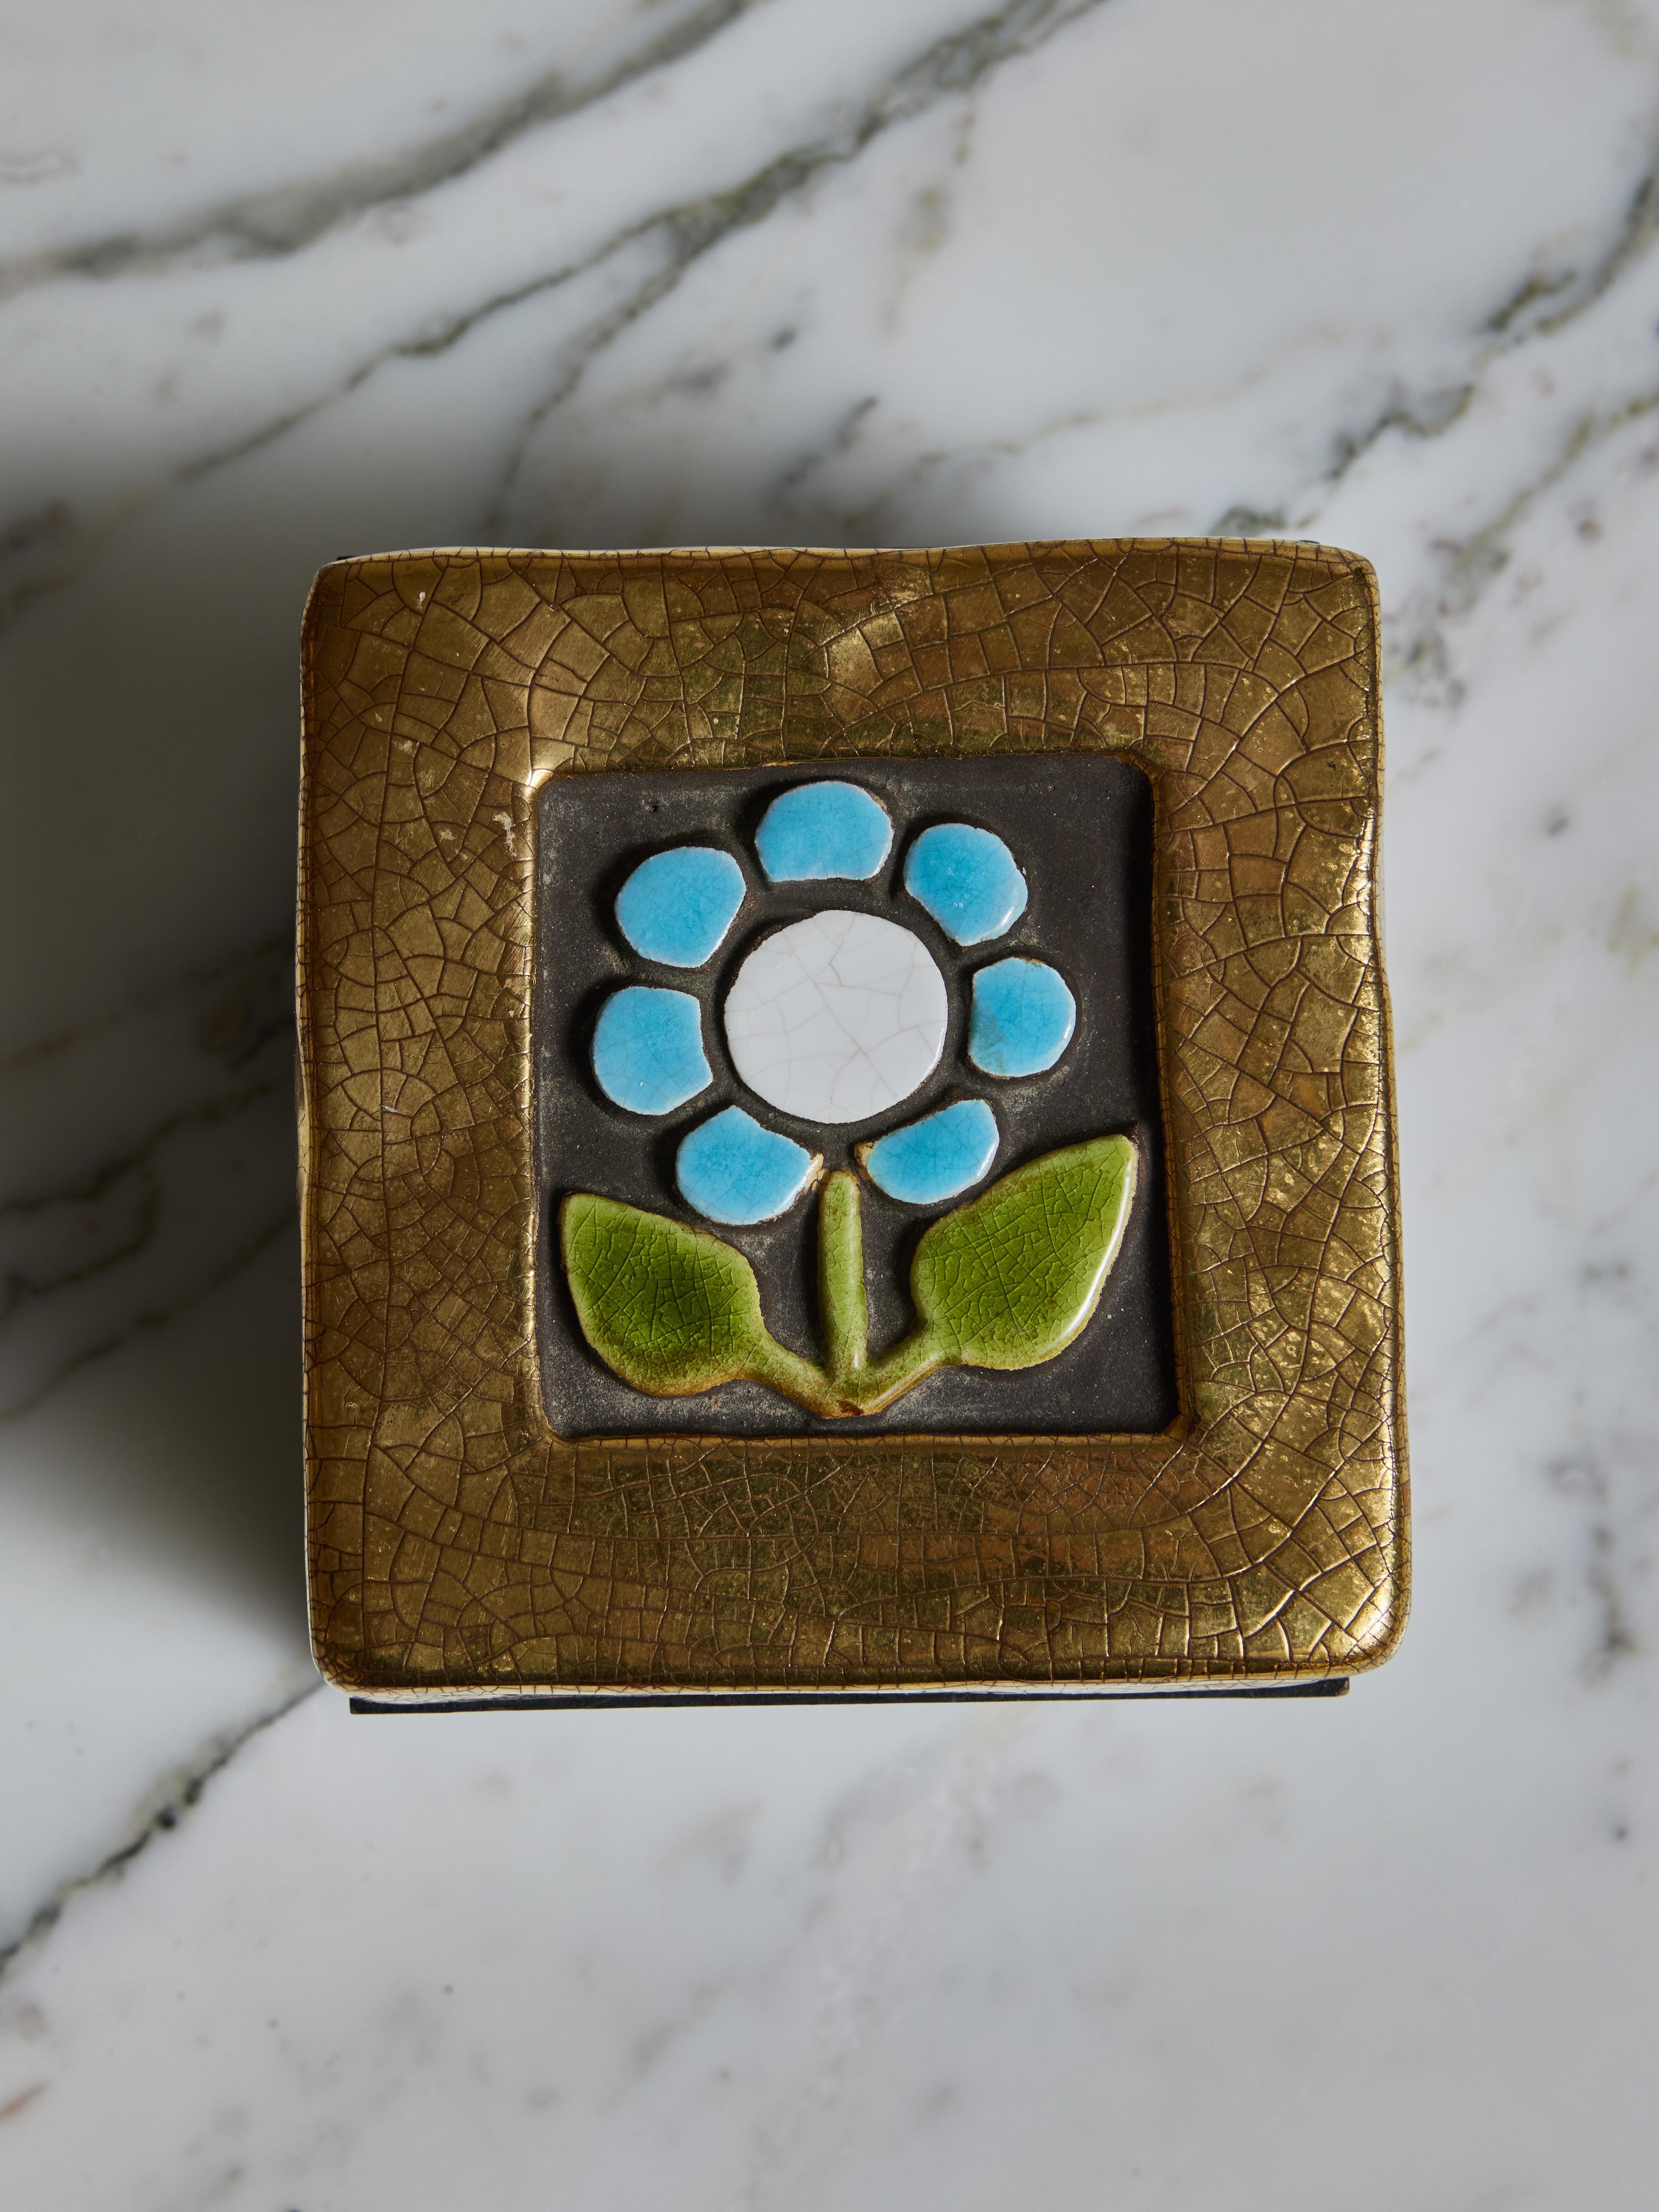 Decorative square box by Mithé Espelt, stained wood box covered with a ceramic lid showing a single white and blue flower framed with gold glaze.

 

Marie Thérèse Espelt, aka. Mithé Espelt (1923-2020)


Born in the town of Lunel, near Montpelier;